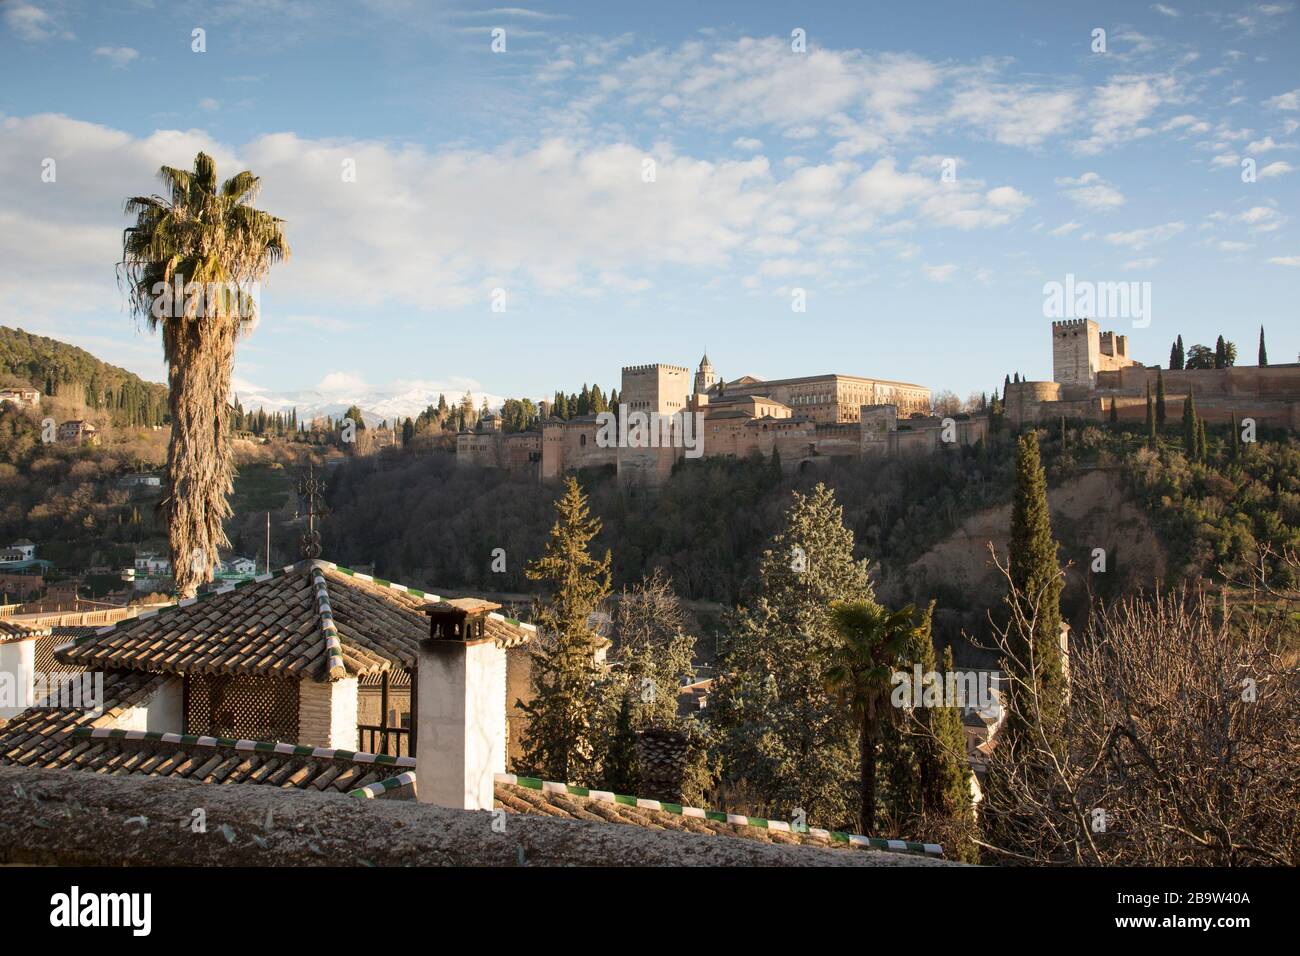 View of the Alhambra Palace from the Albaicin quarter of Granada, Andalusia, Spain Stock Photo